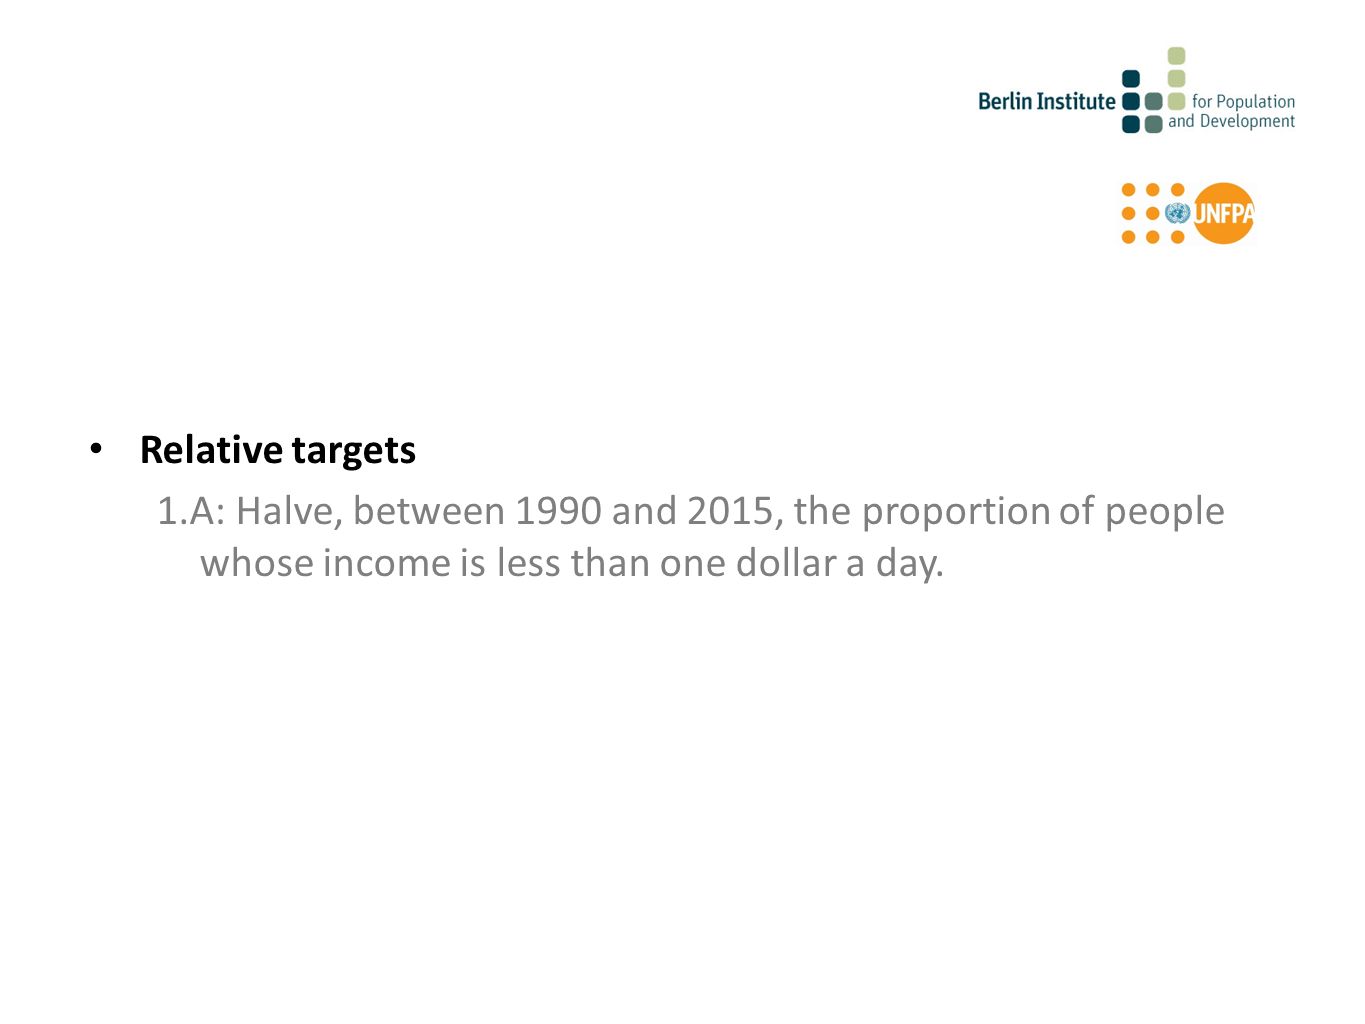 Relative targets 1.A: Halve, between 1990 and 2015, the proportion of people whose income is less than one dollar a day.